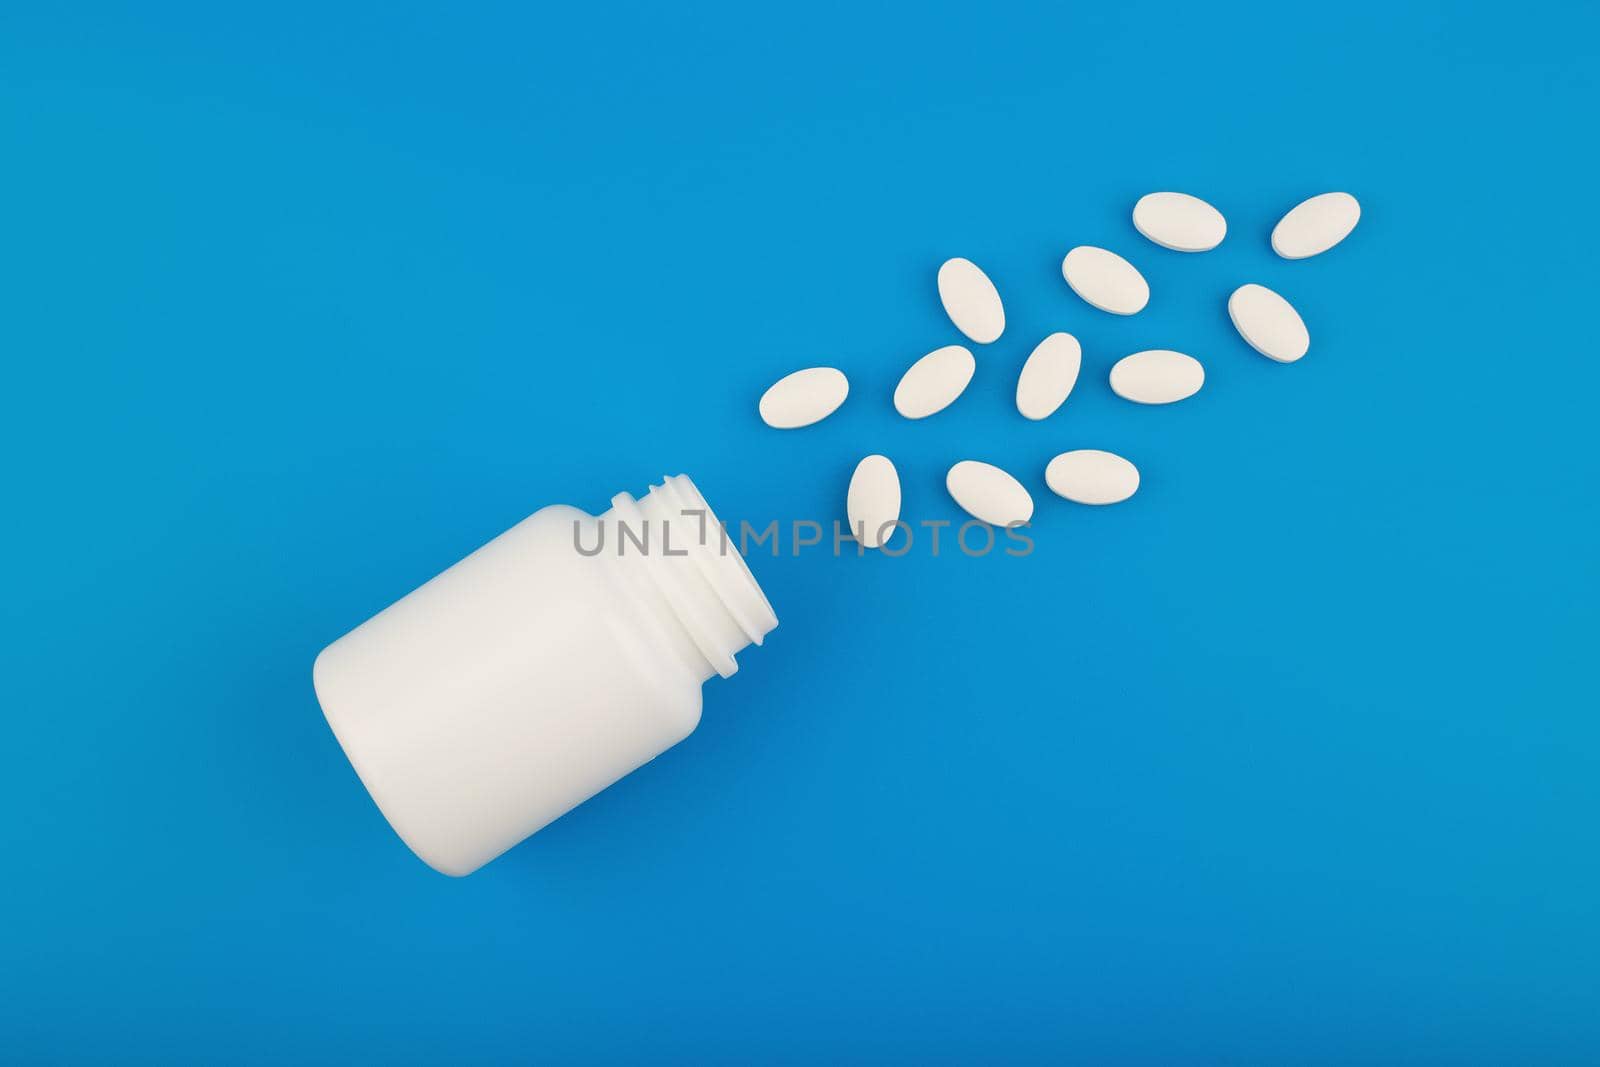 White unbranded medication bottle with spilled oval pills on blue background. Concept of medical treatment, virus protection or vitamins